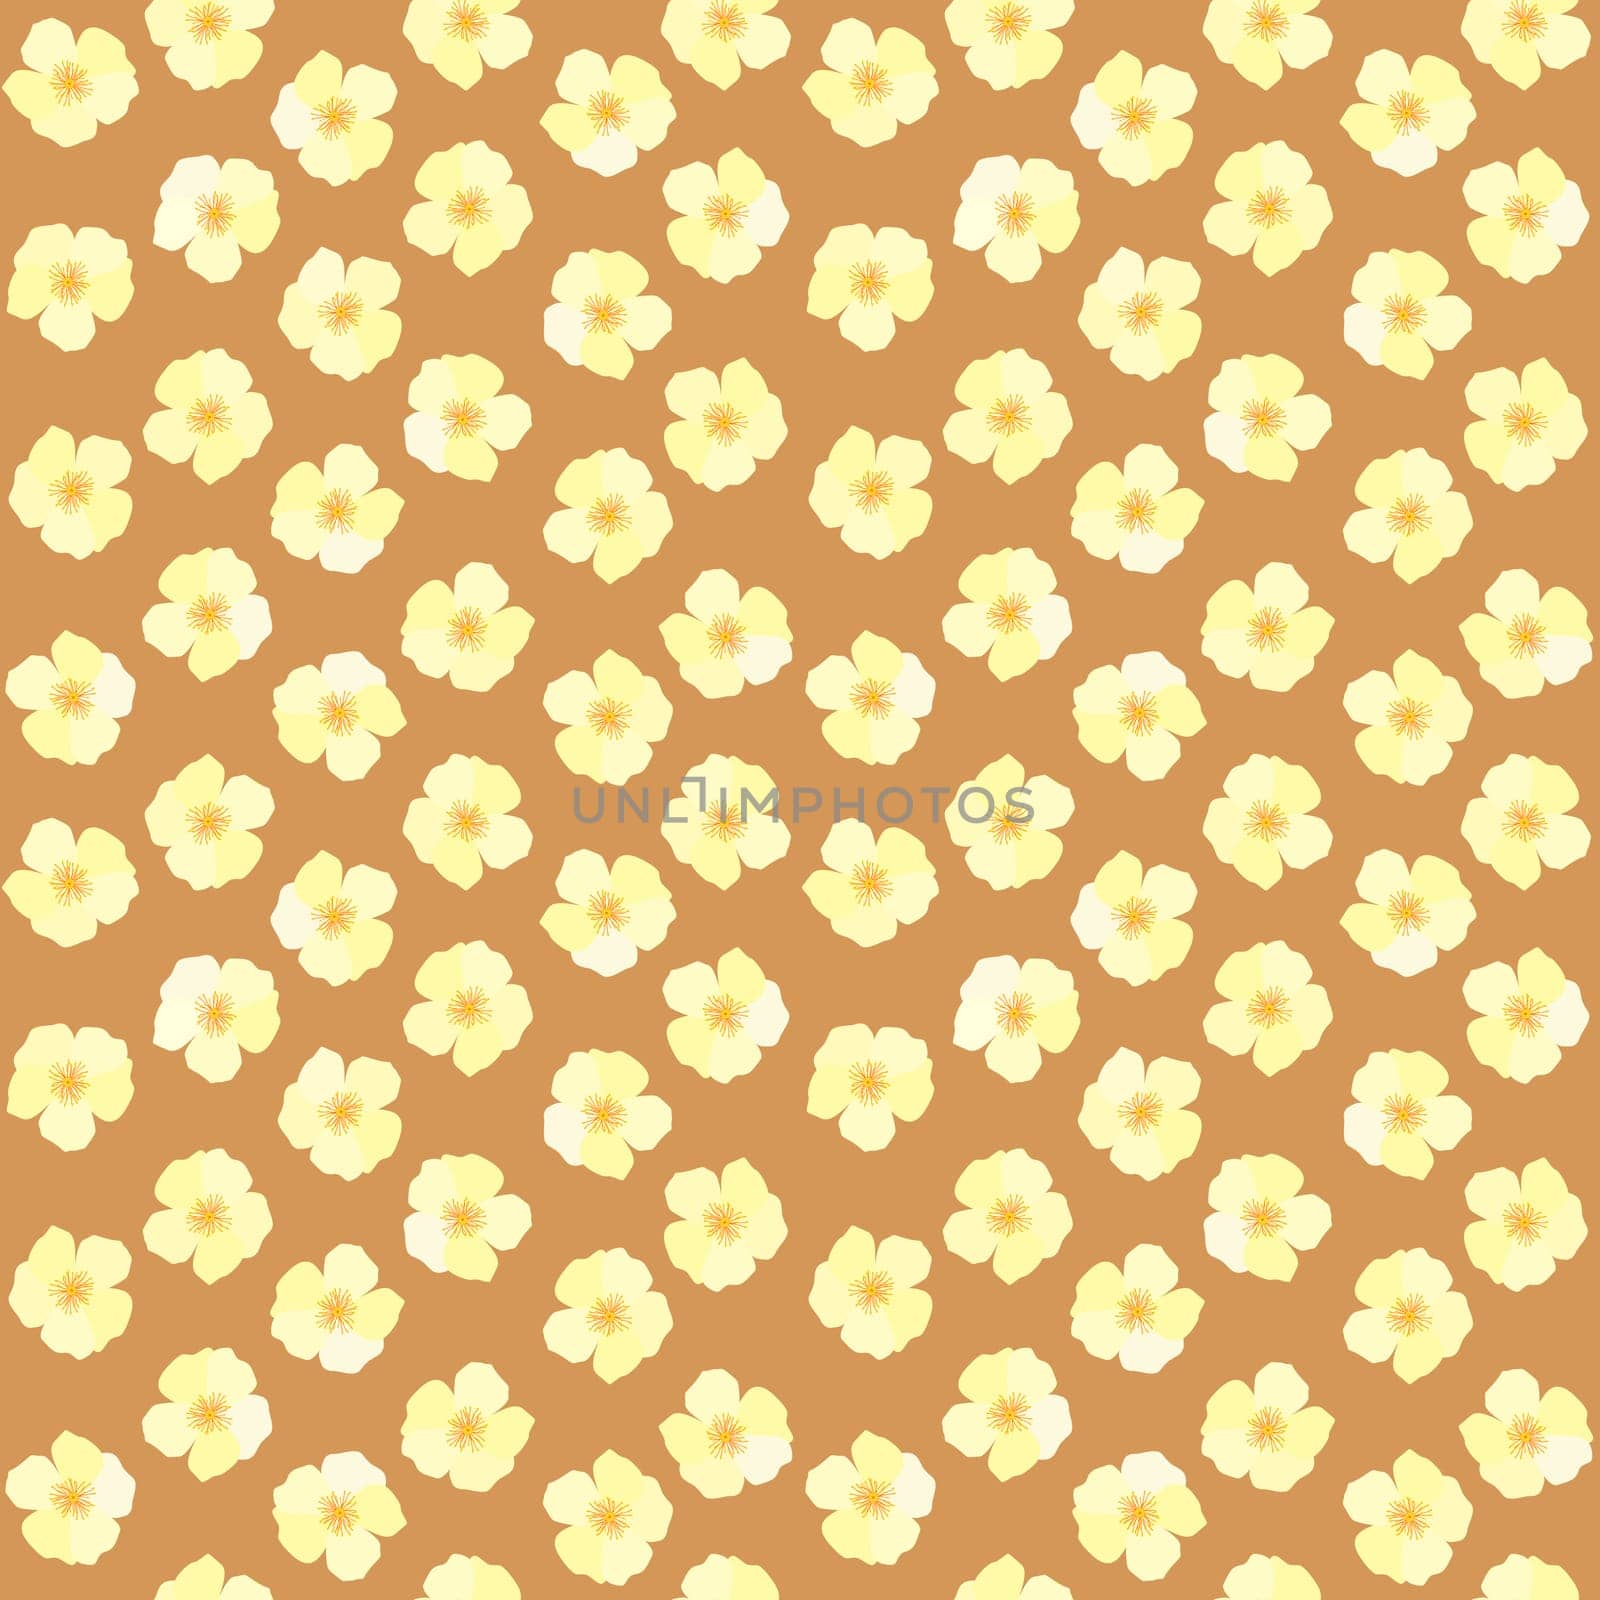 Floral seamless pattern with delicate yellow  blossoms on a brown background